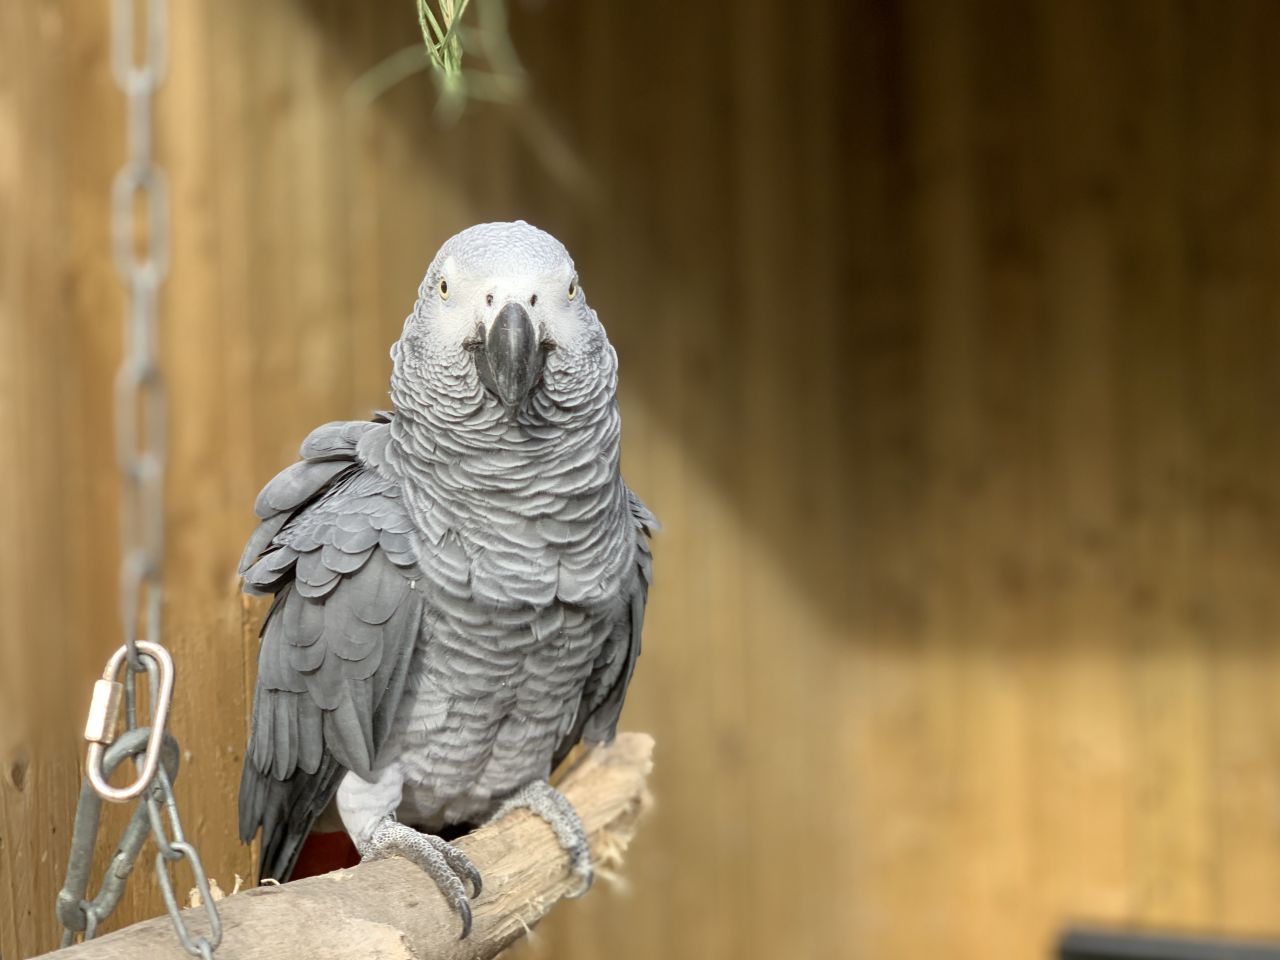 Elsie, one of the potty-mouthed parrots. (Jade shown top).